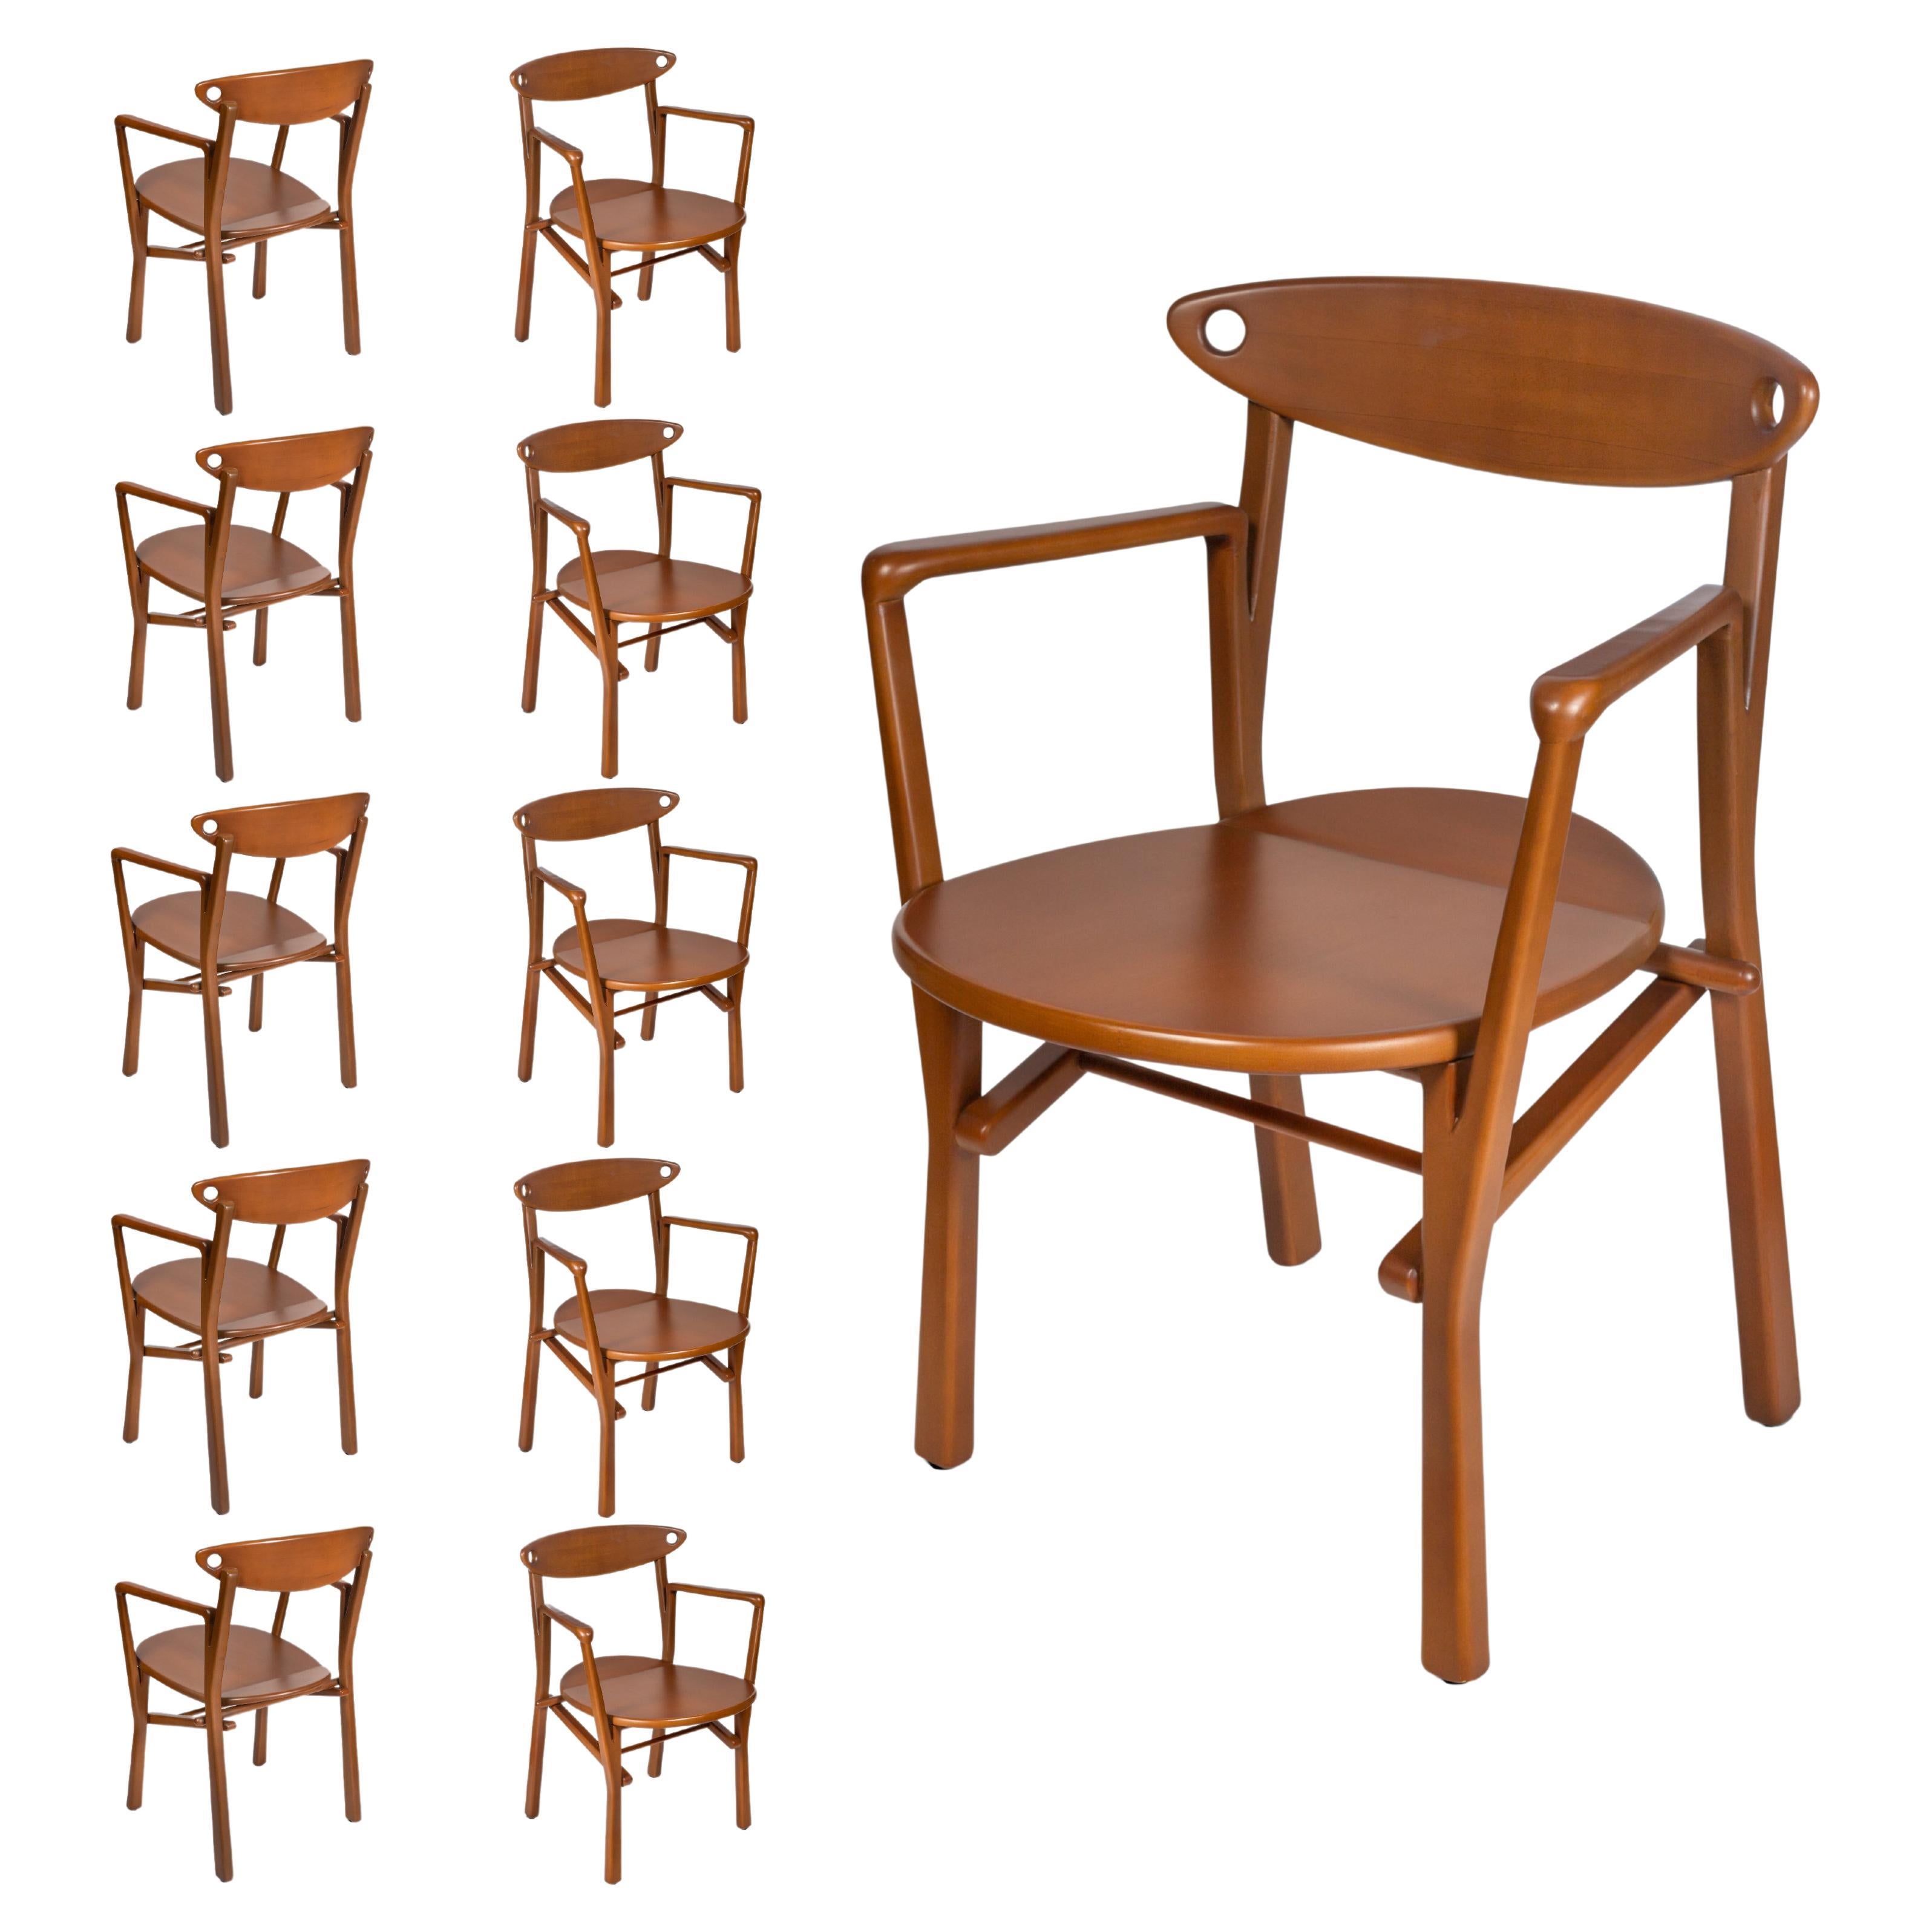 Set of 10 Dinning Chairs Laje in Light Brown Finish Wood